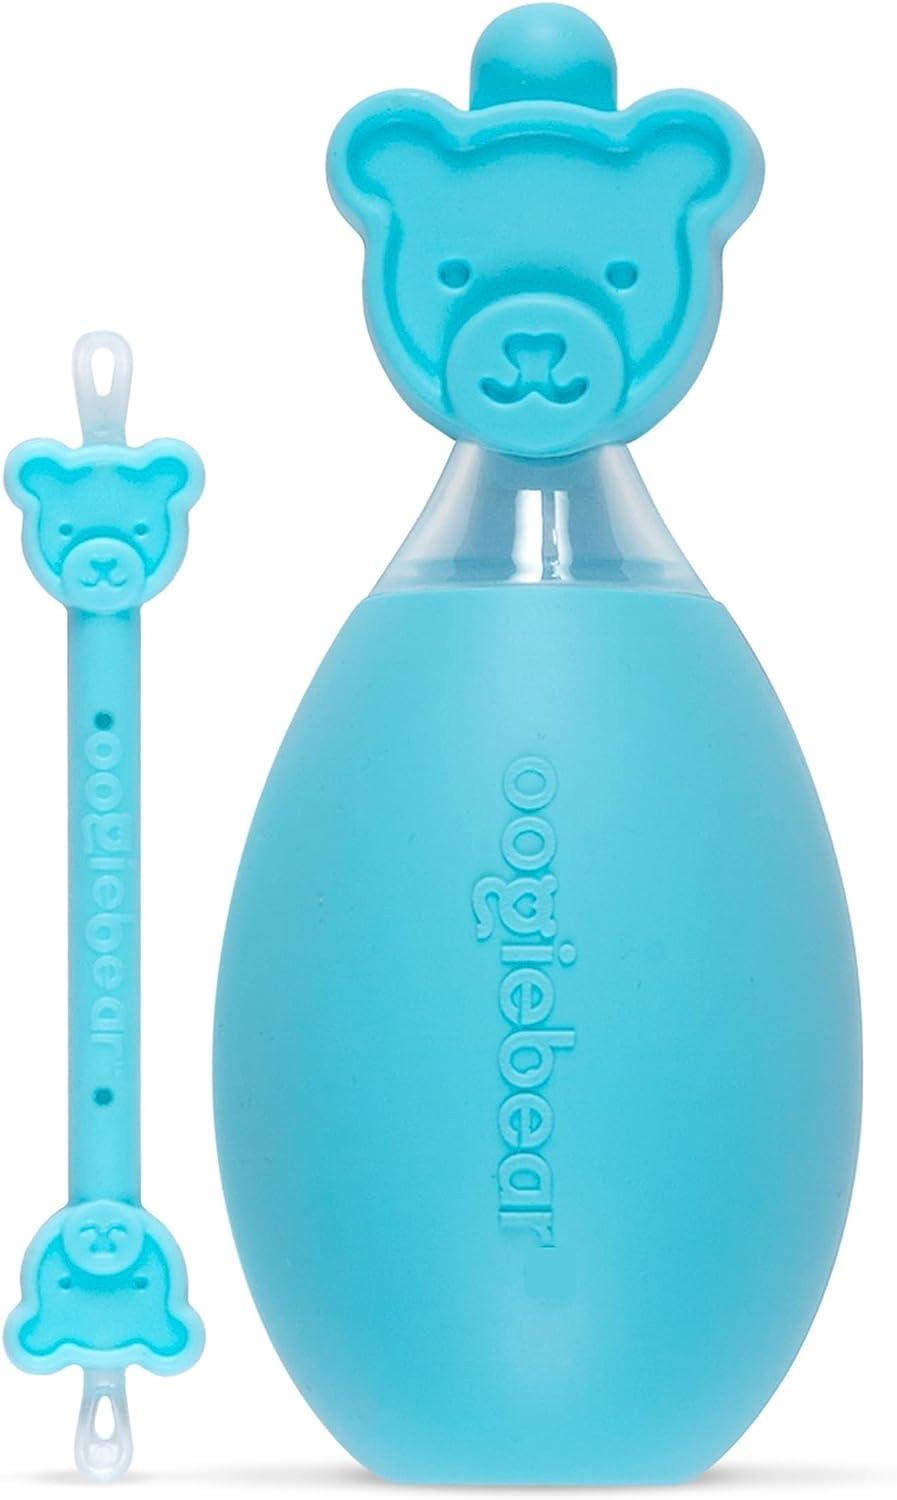 oogiebear Bear Pair — The Safe Baby Booger Cleaner and Nose